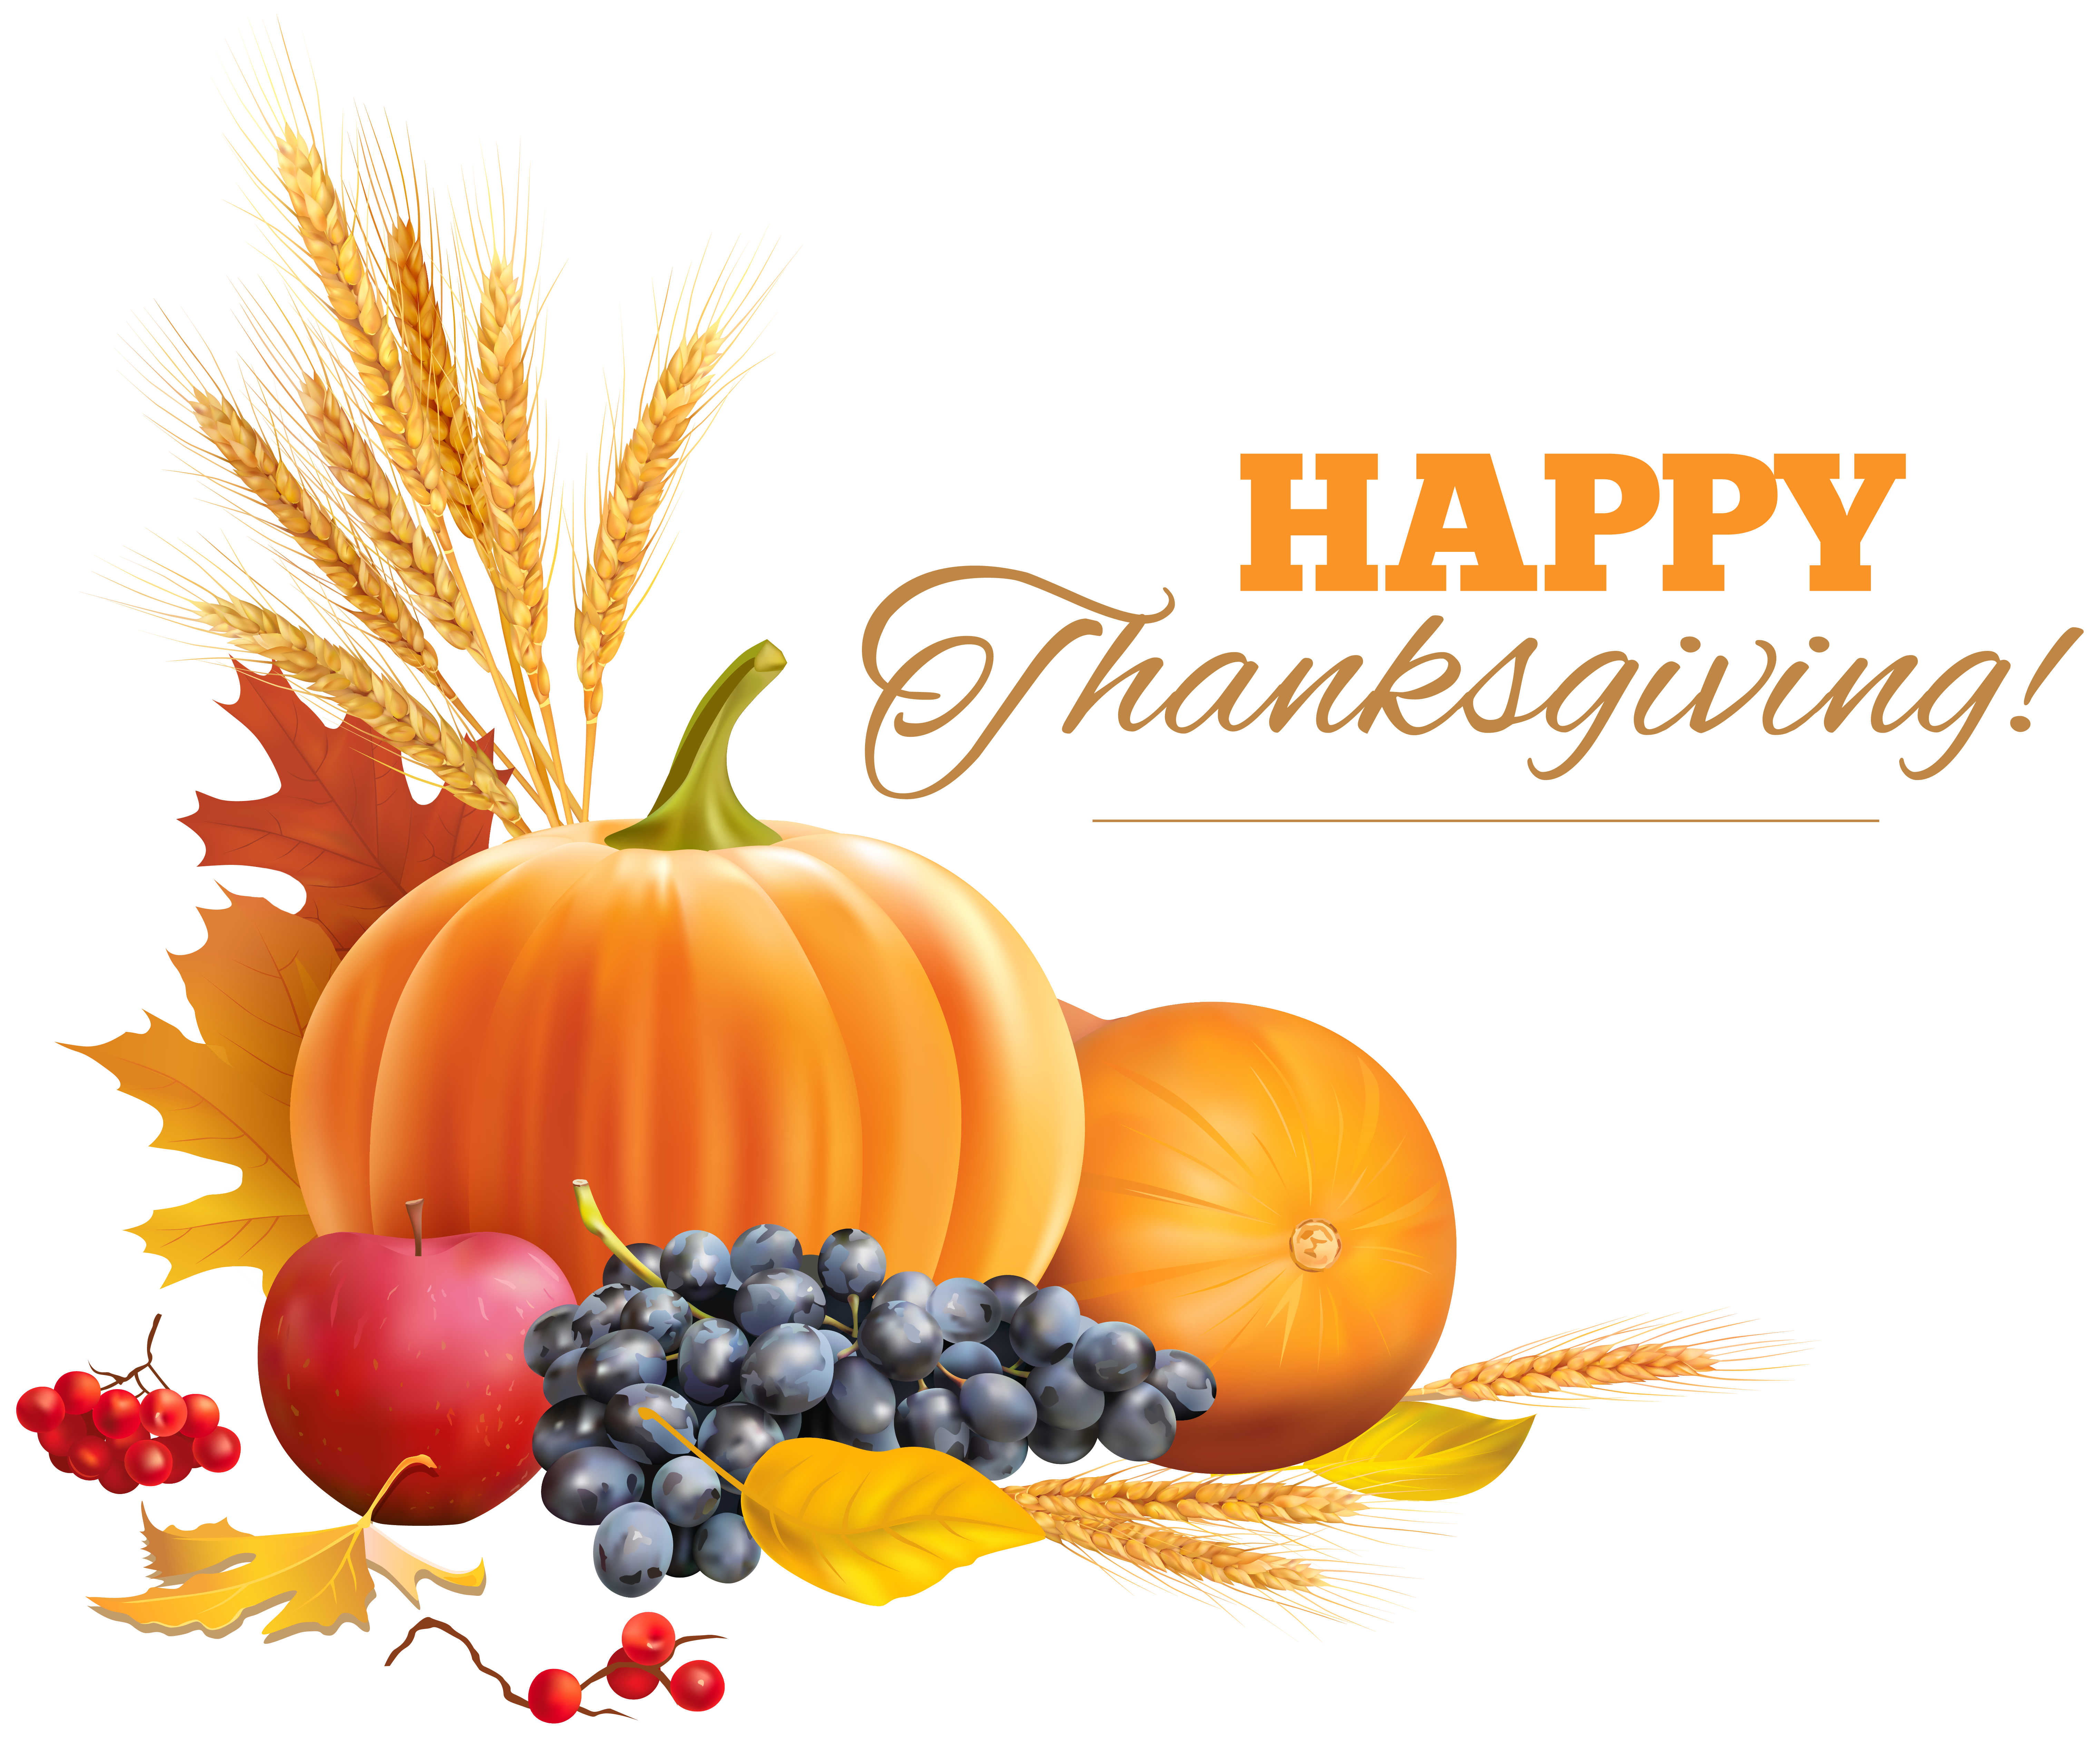 Happy Thanksgiving Decor Png Clipart Image - Thanks Giving, Transparent background PNG HD thumbnail